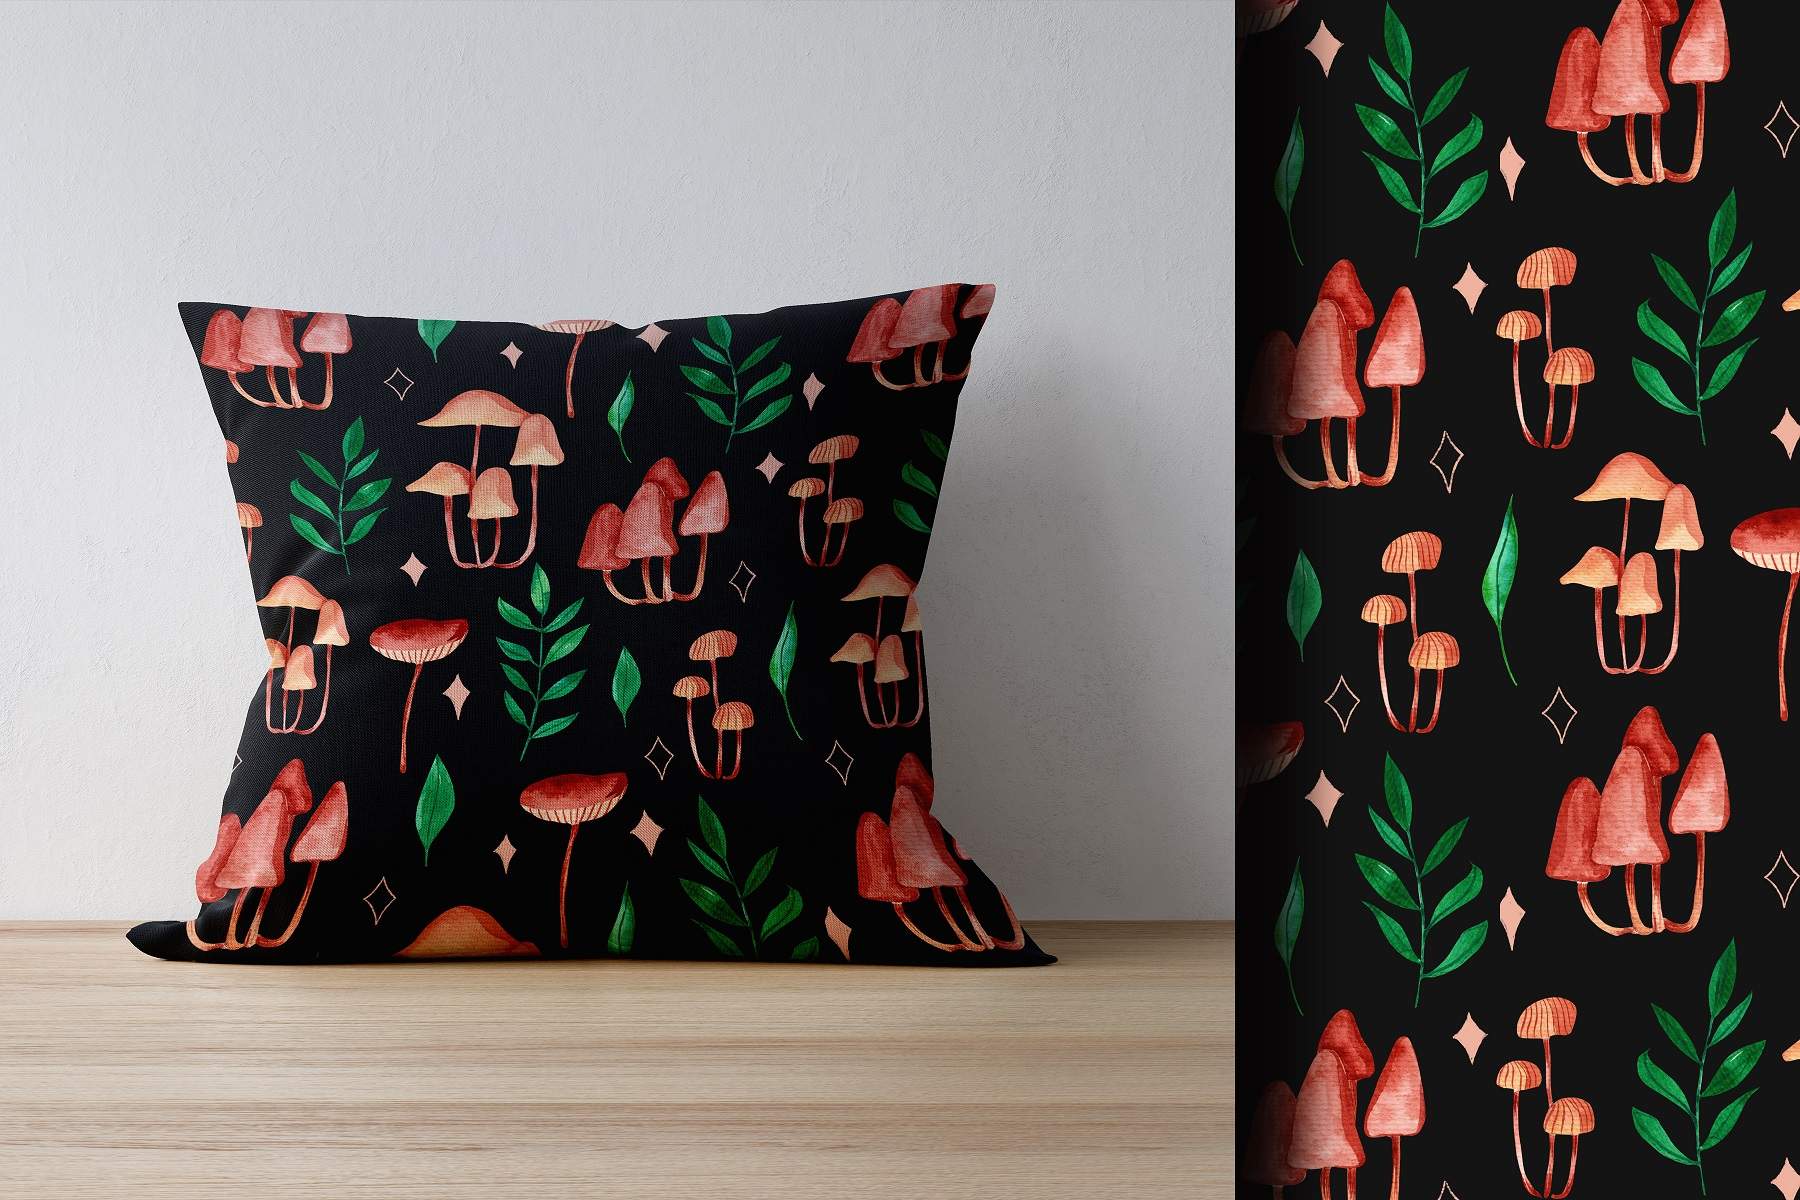 Black pillow with pink and green mushrooms on it.